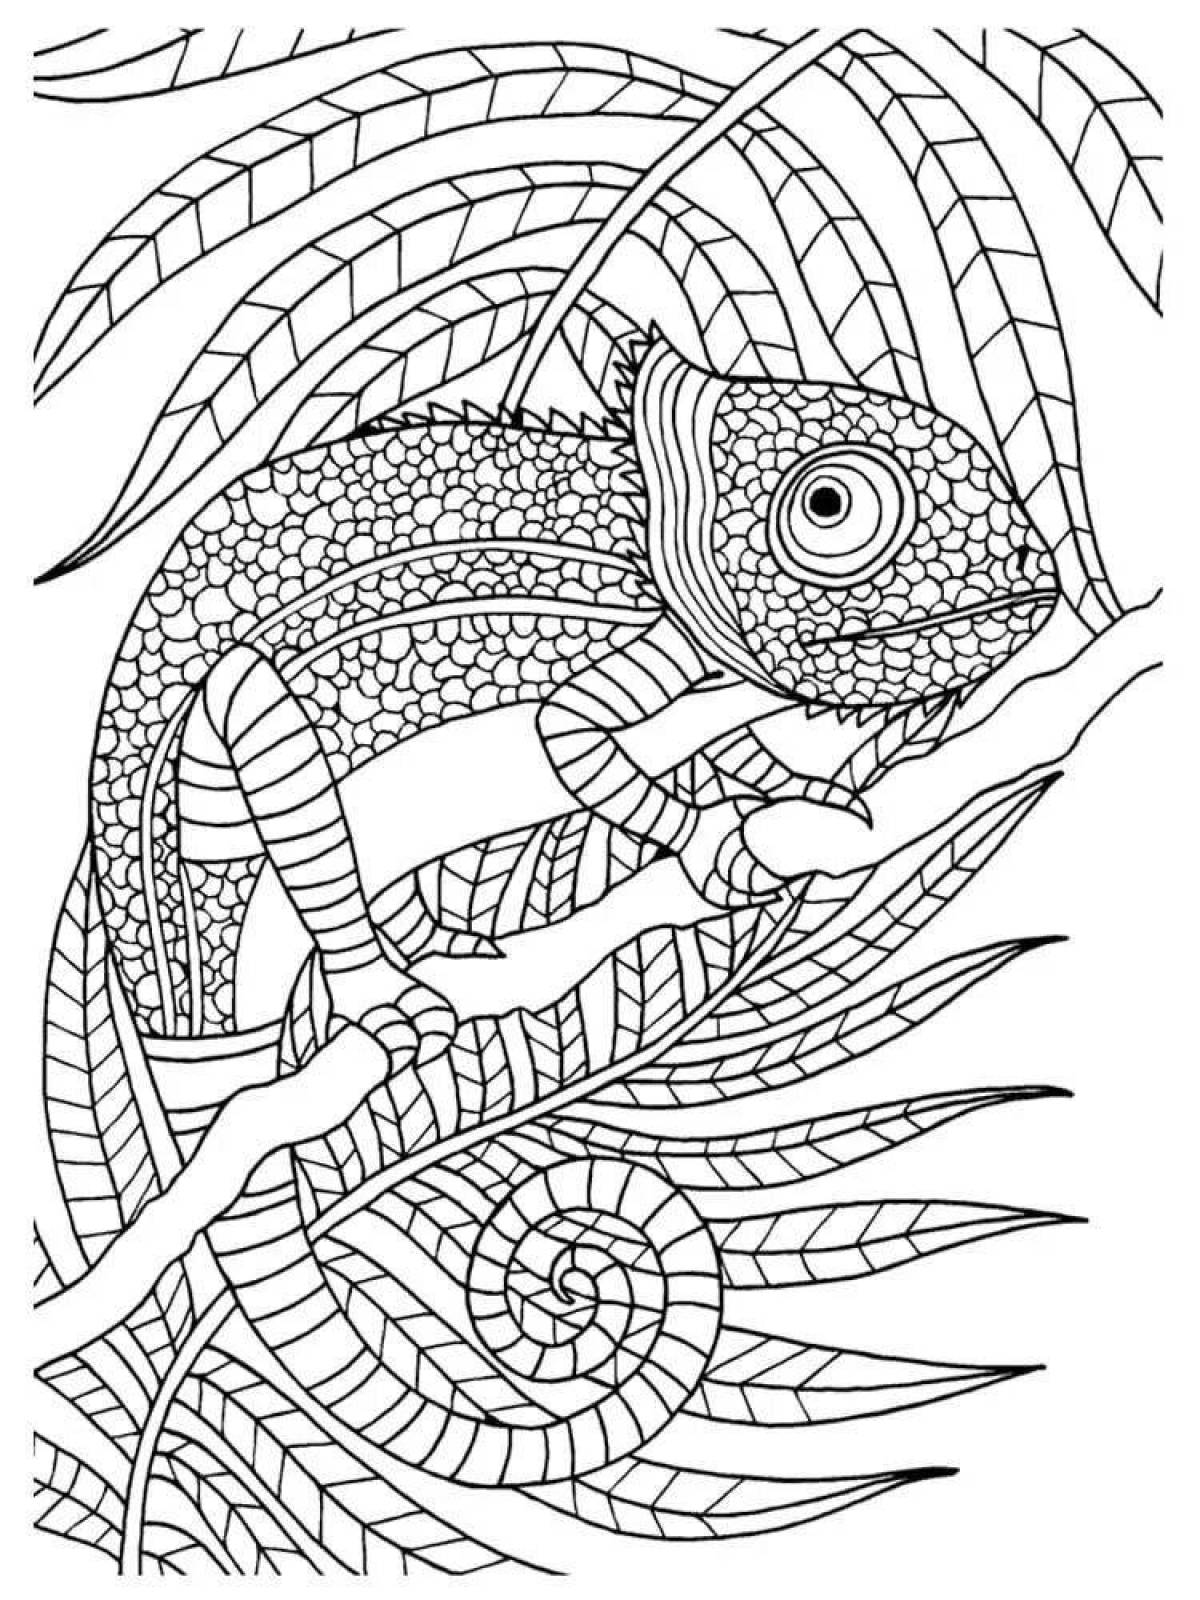 Ecstatic coloring page antistress chameleon